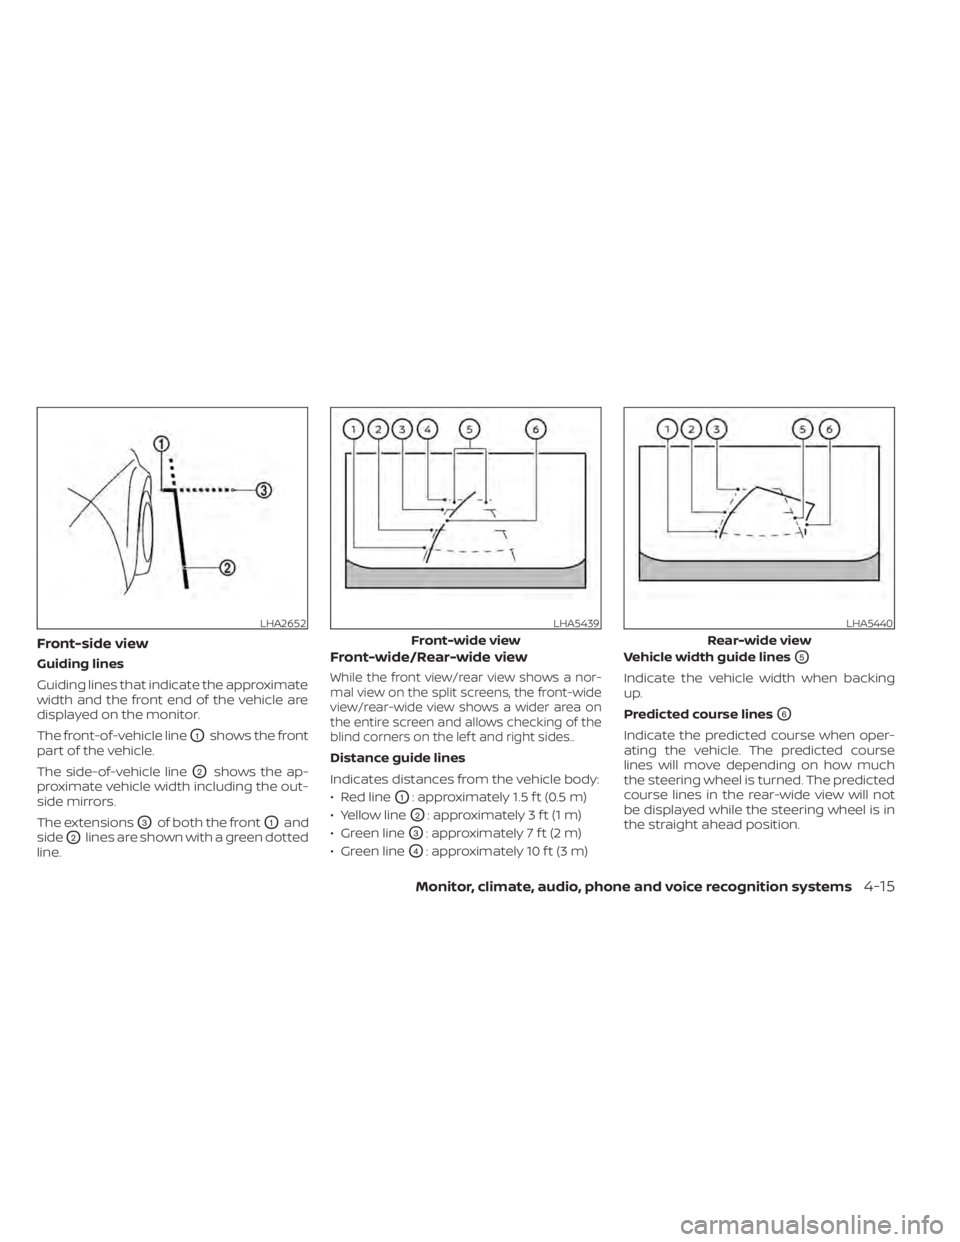 NISSAN PATHFINDER 2023  Owners Manual Front-side view
Guiding lines
Guiding lines that indicate the approximate
width and the front end of the vehicle are
displayed on the monitor.
The front-of-vehicle line
O1shows the front
part of the v